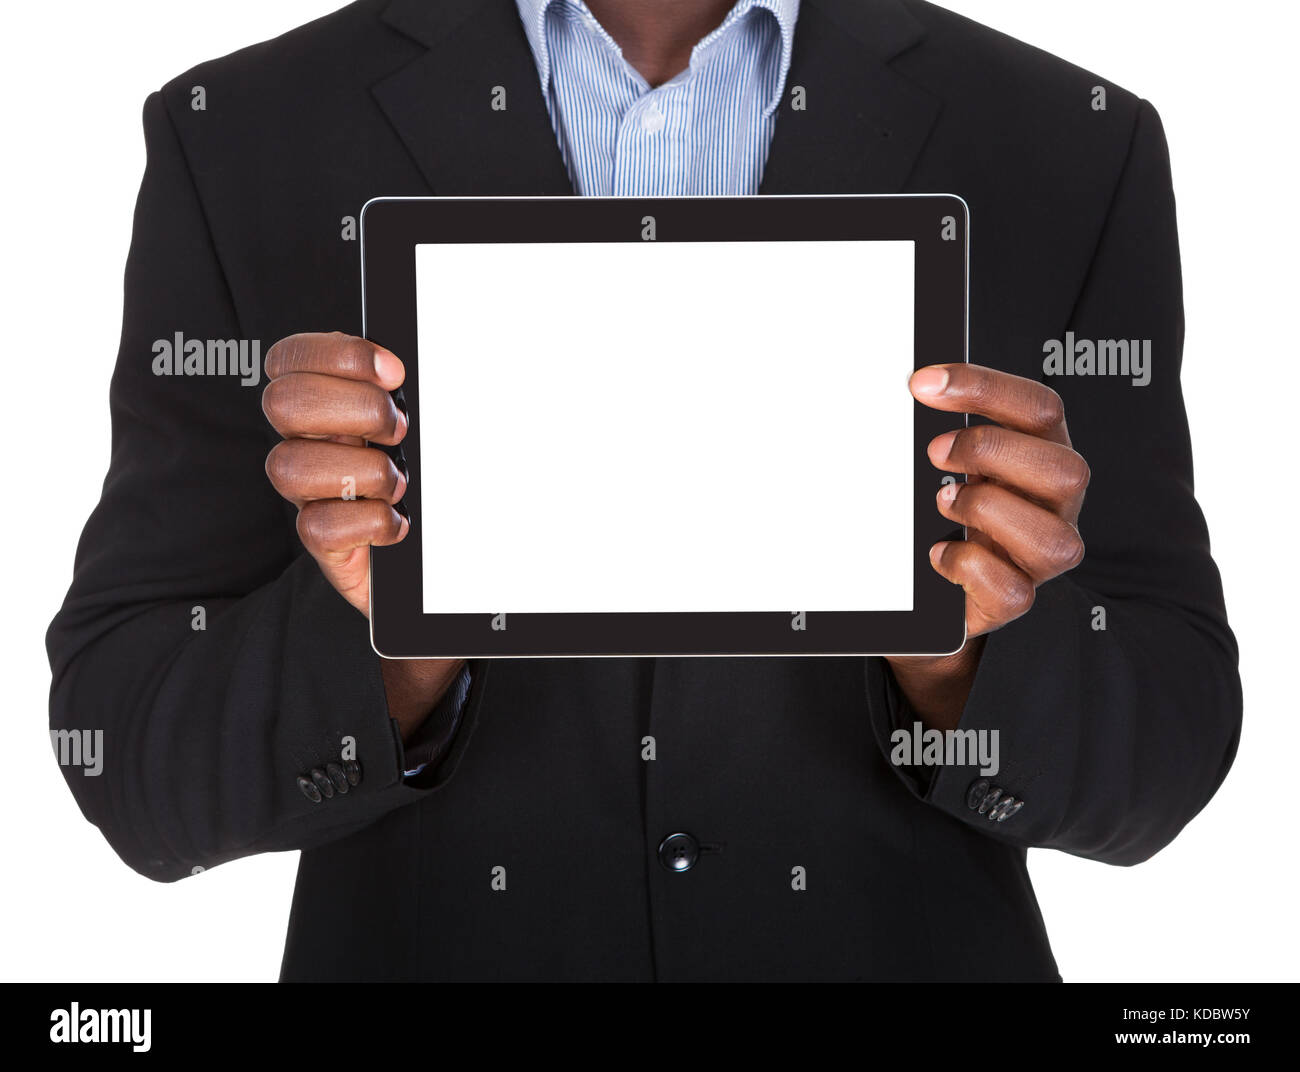 Business Man Holding Digital Tablet On White Background Stock Photo